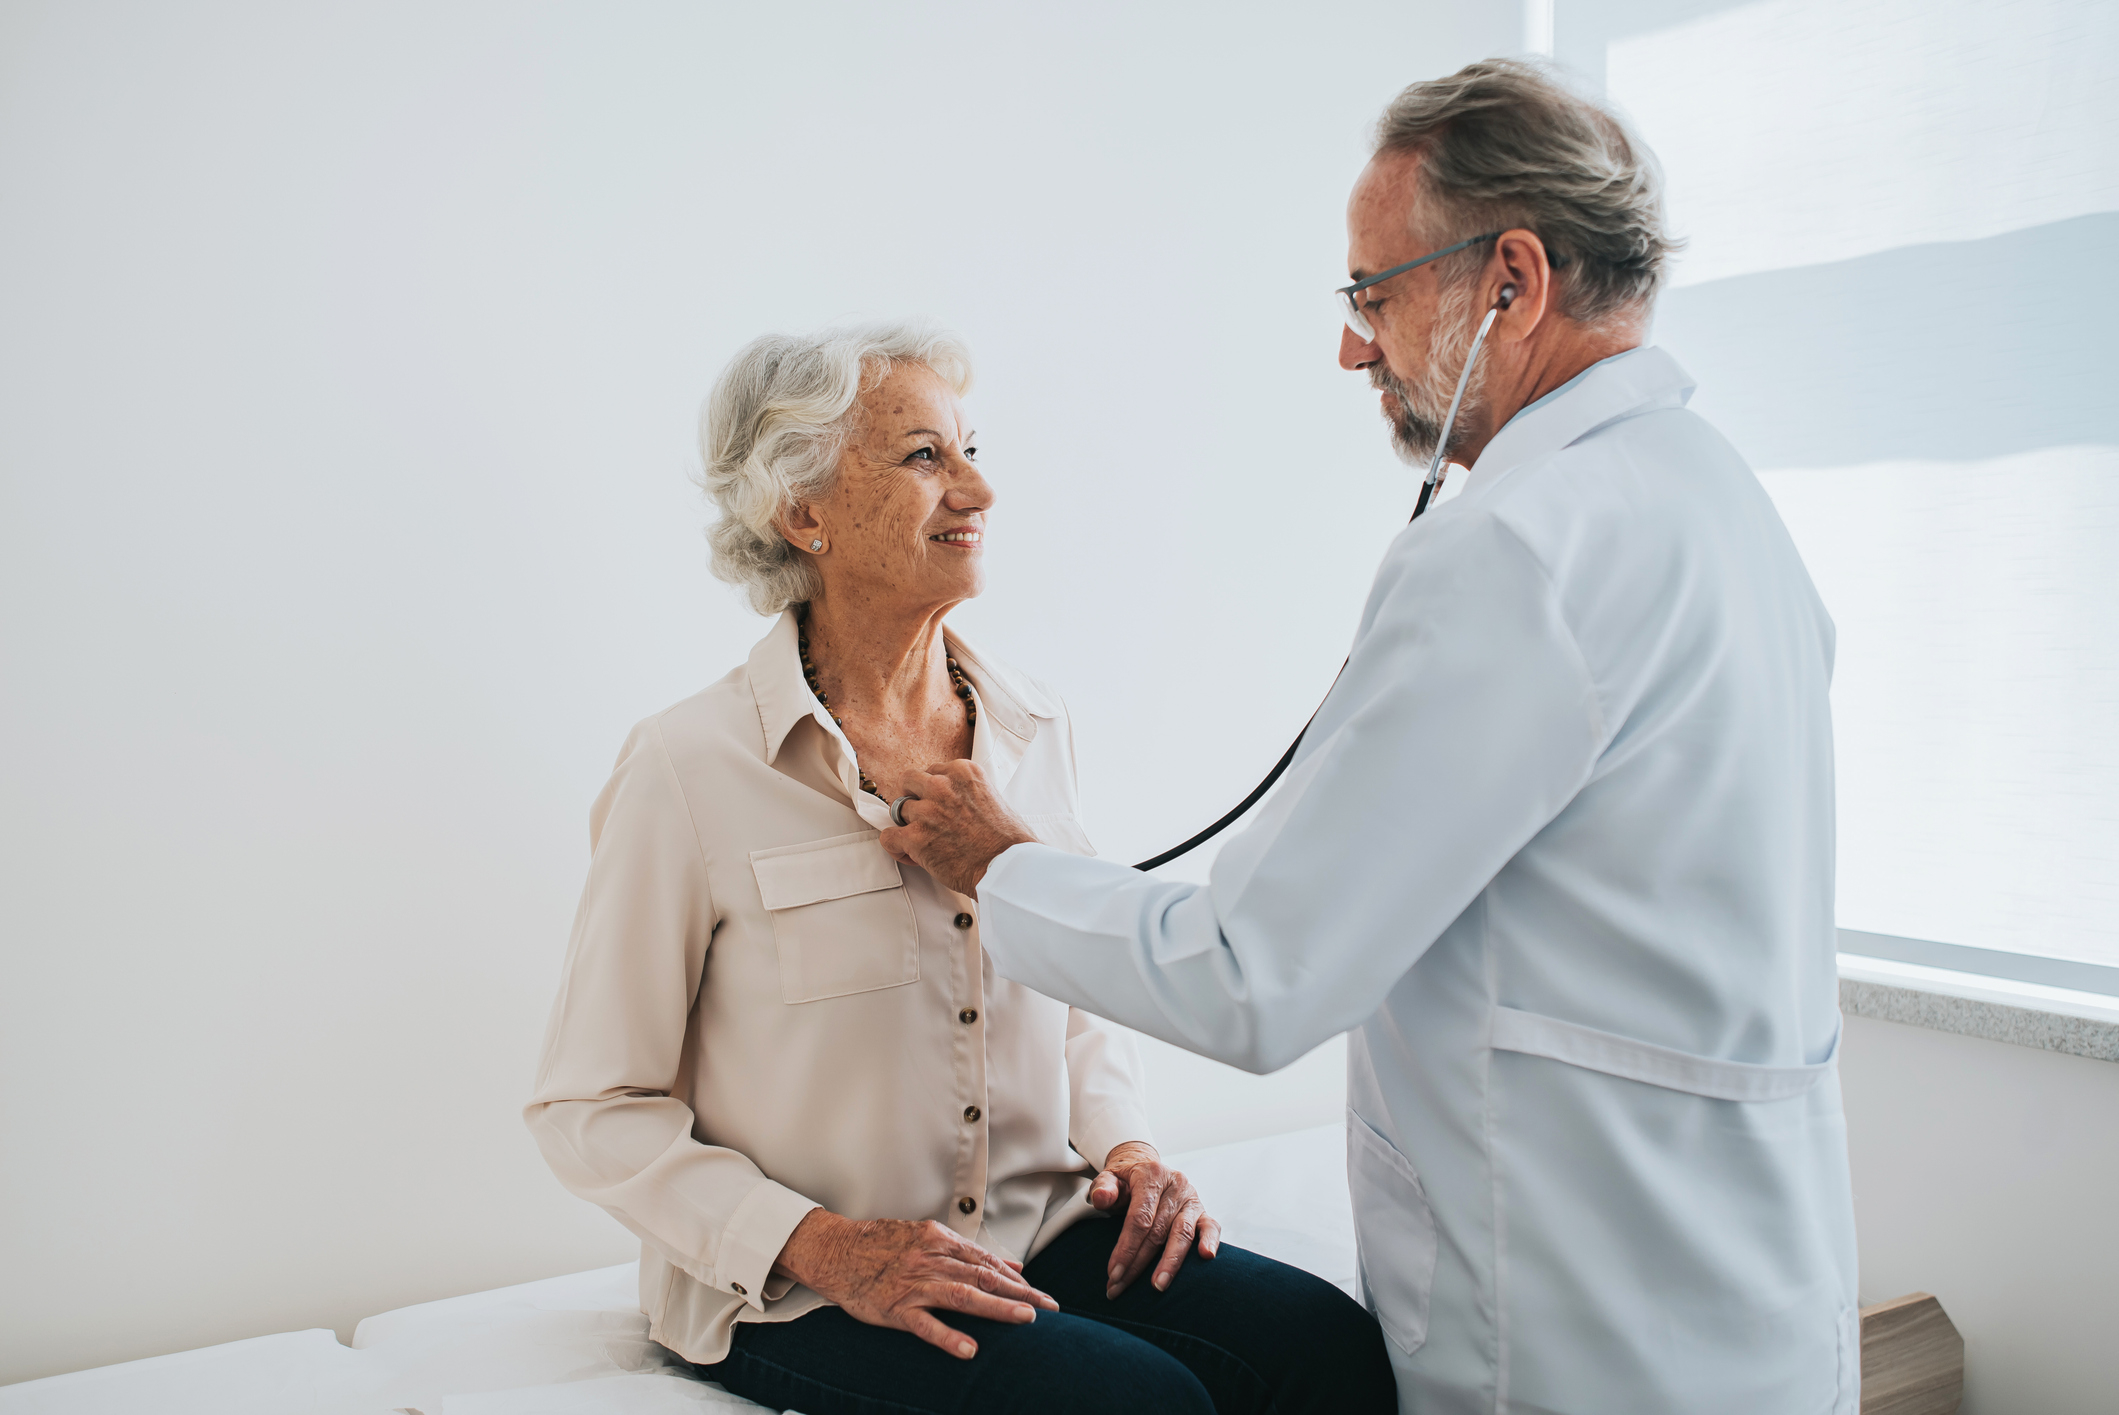 Doctor with a stethoscope examining a smiling elderly woman